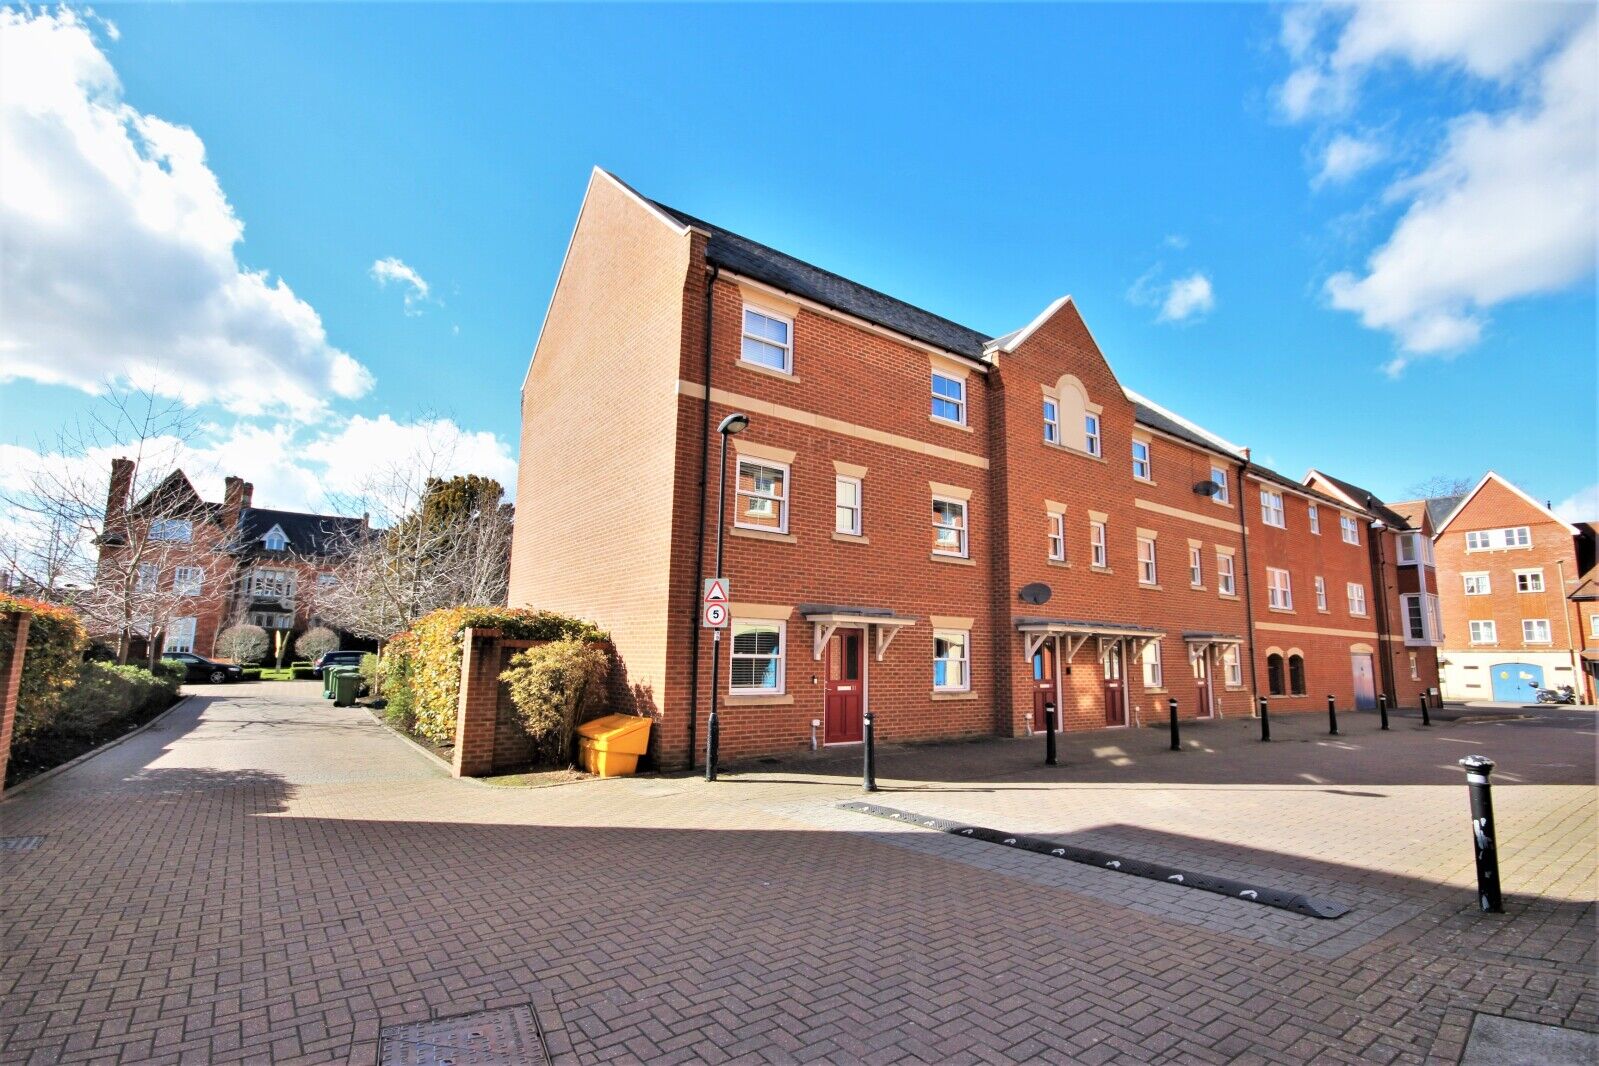 4 bedroom mid terraced house for sale St. Gabriel's, Wantage, OX12, main image